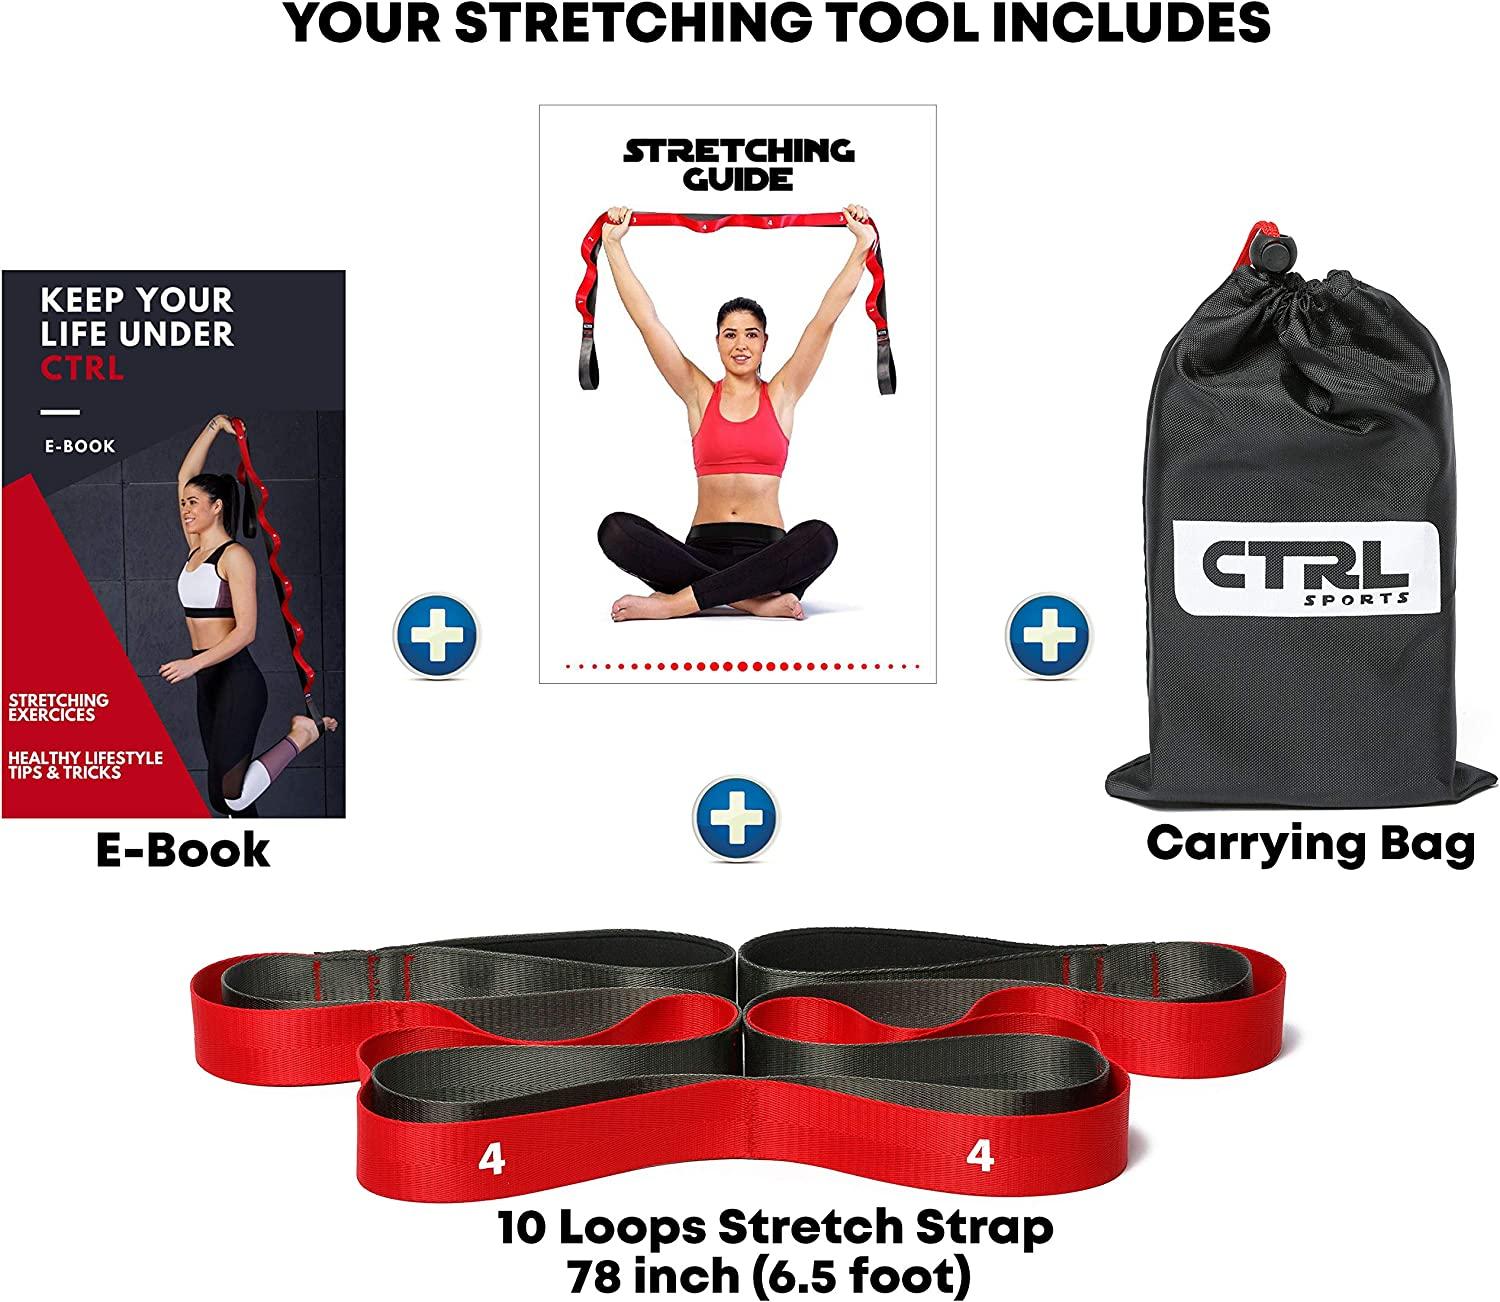  Stretching Strap with Loops - Non Elastic Stretch